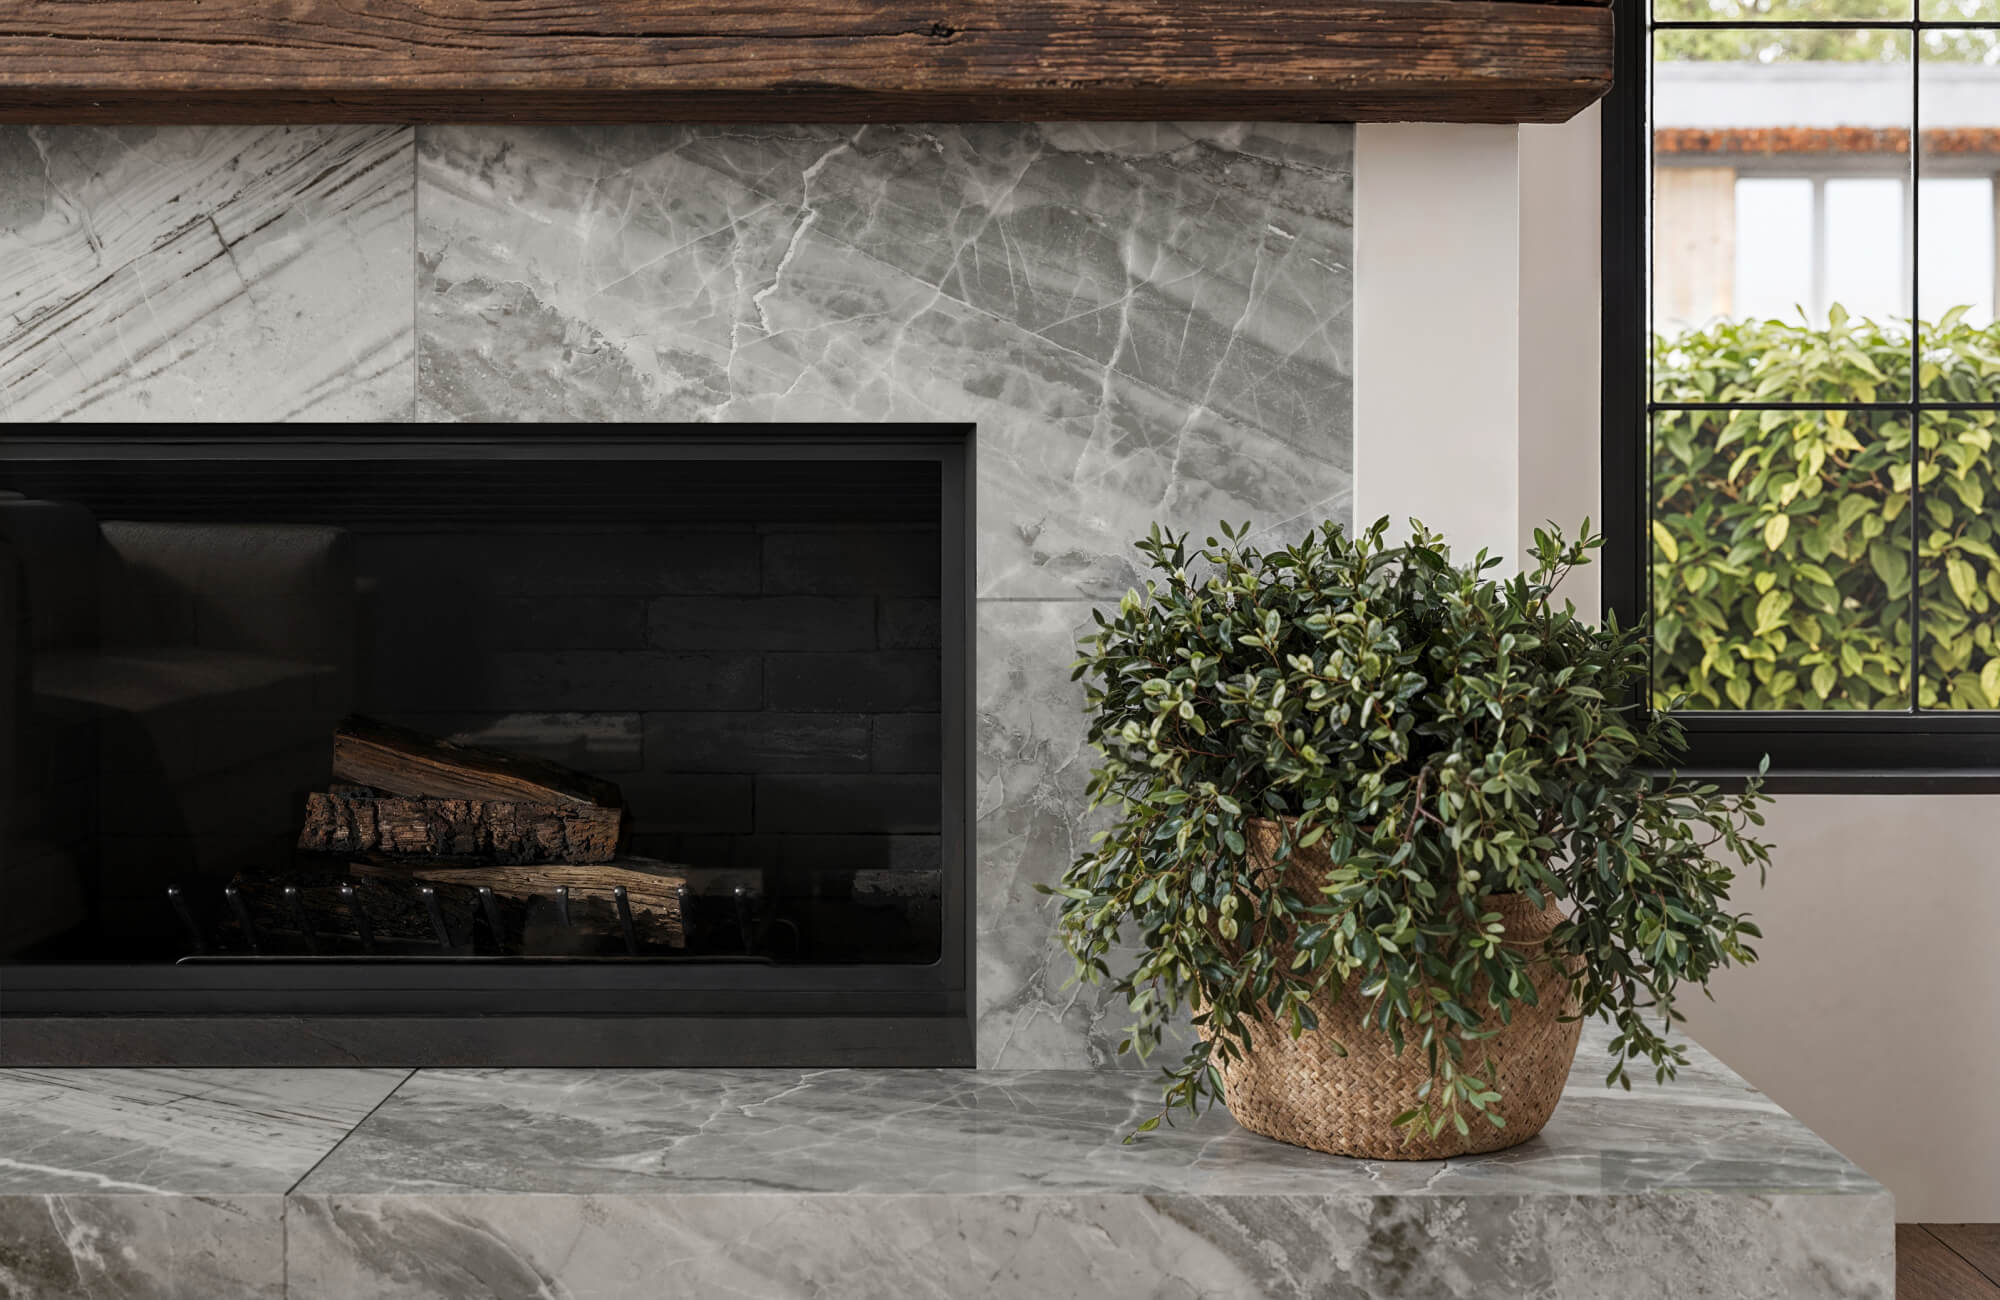 Cozy living room with a fireplace surrounded by Oniciata gray marble-look tiles, a rustic wooden mantle, and a potted plant adding a touch of greenery